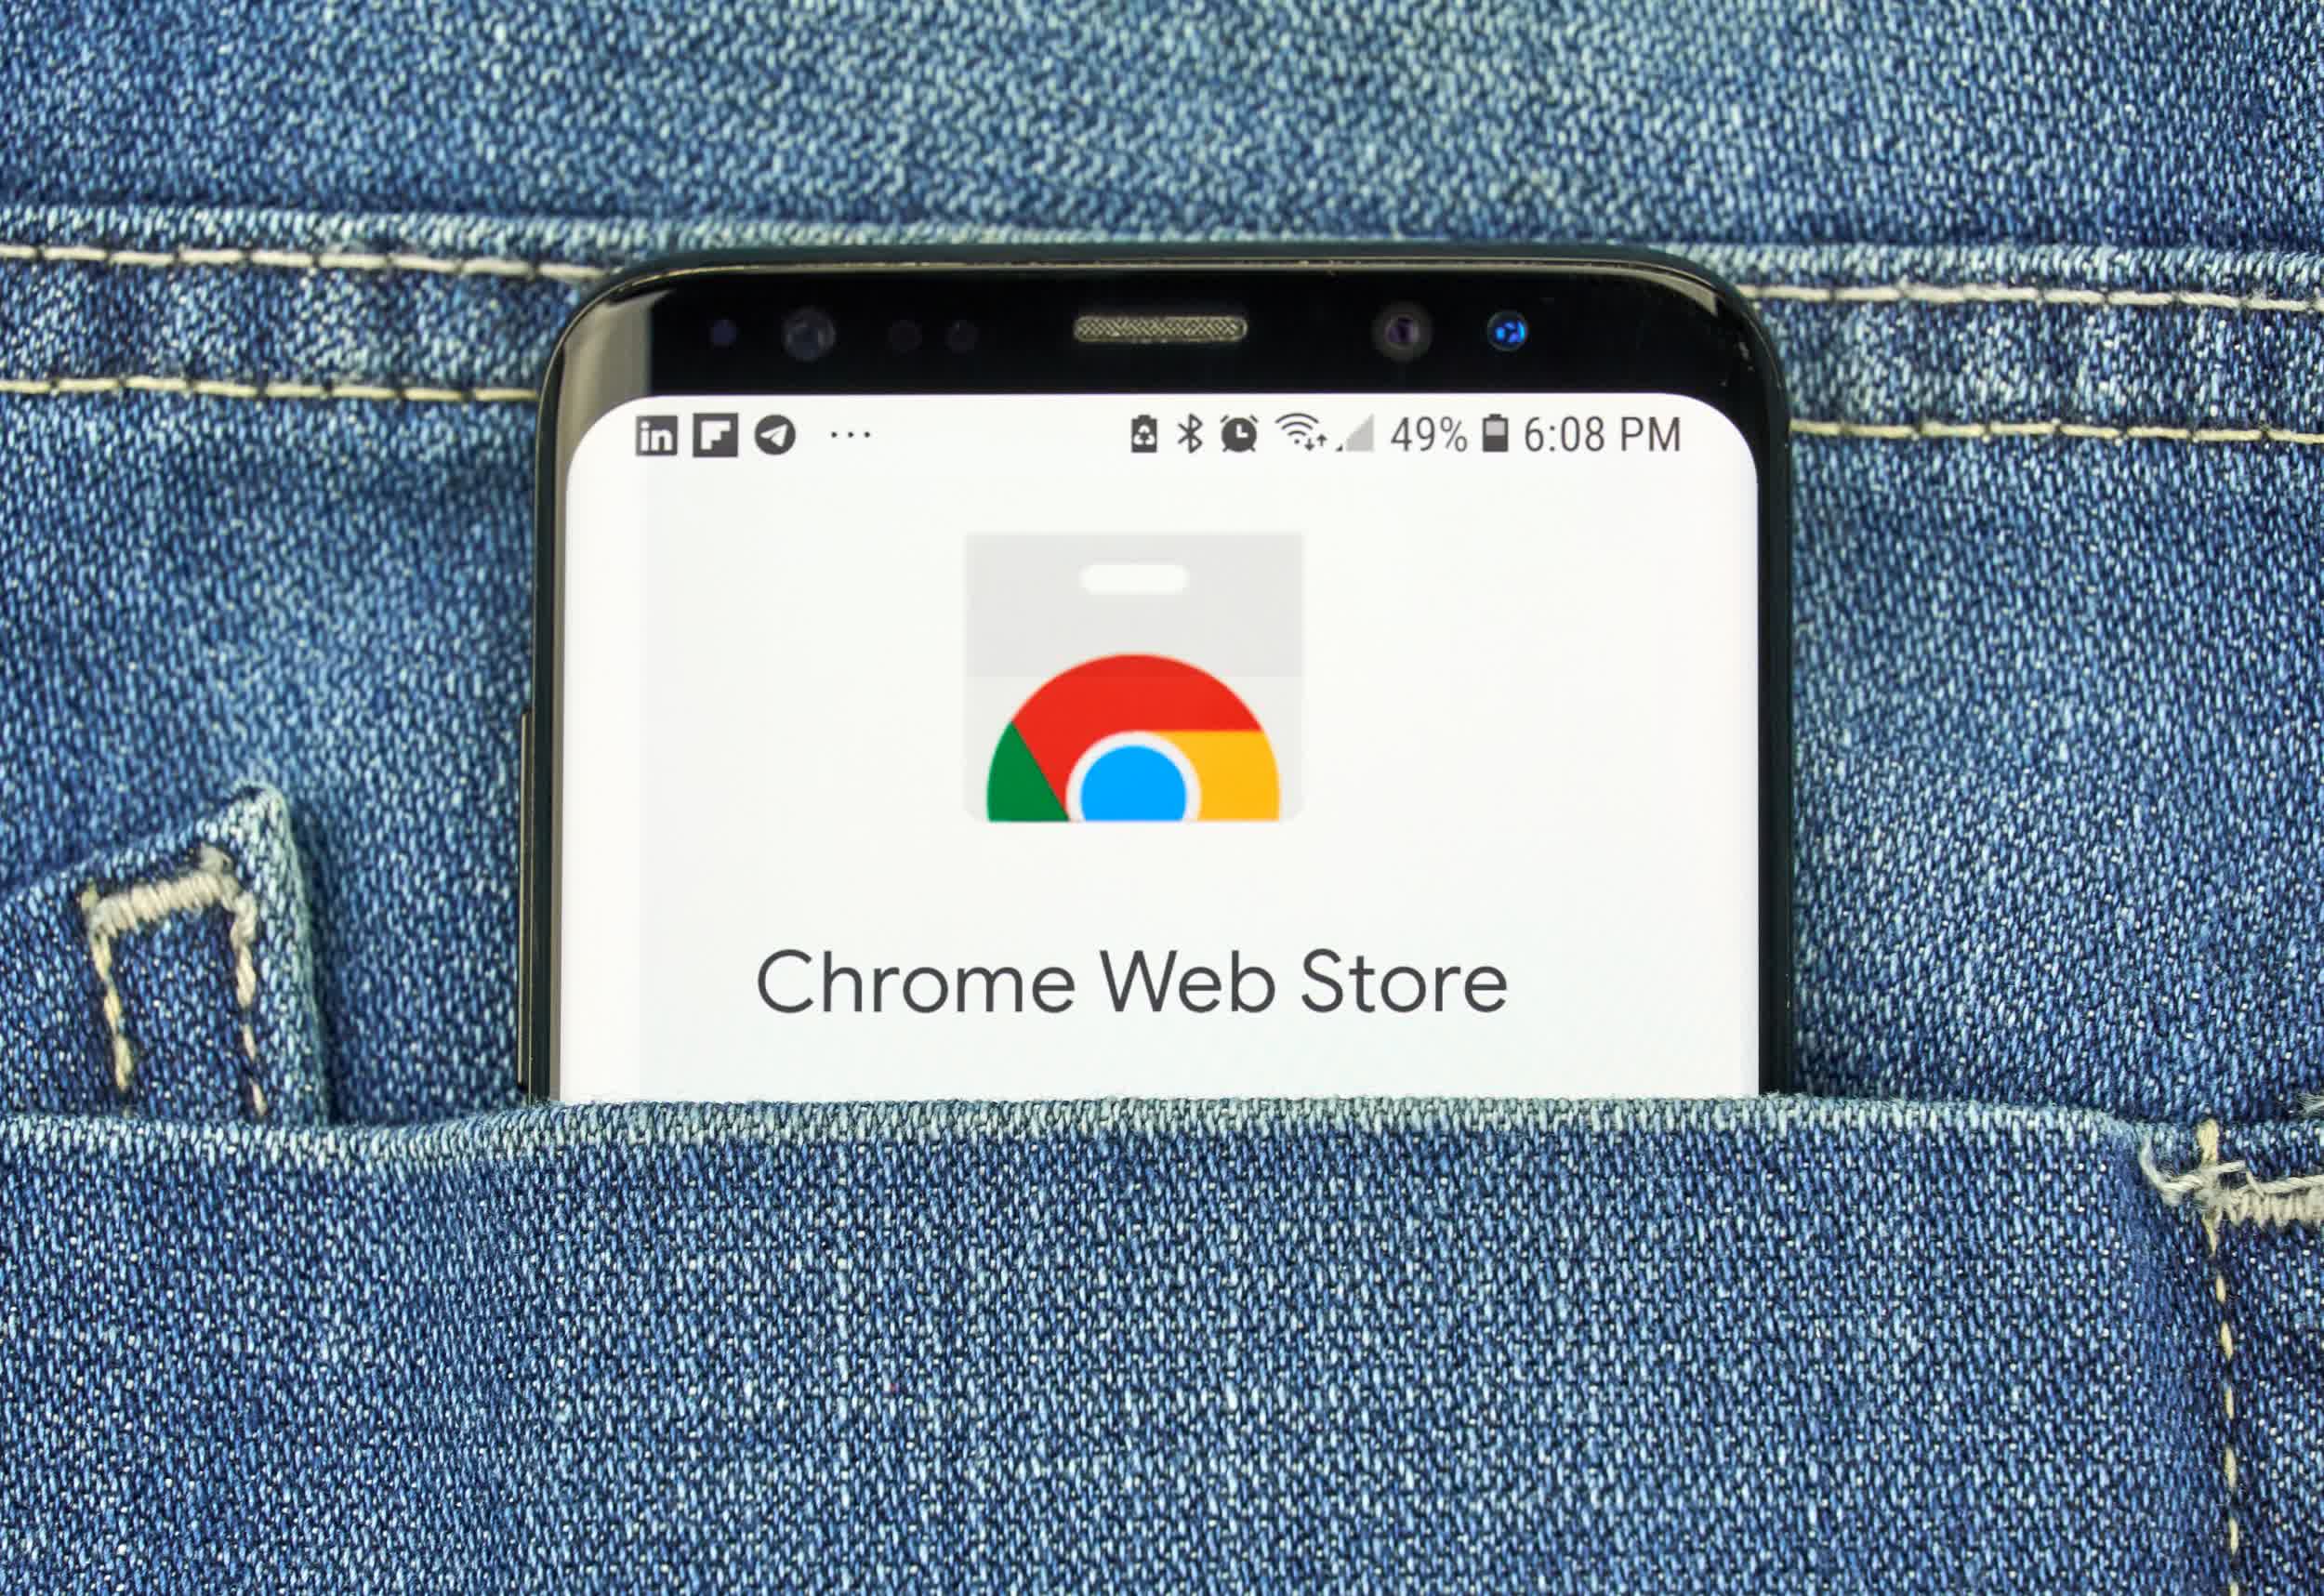 Chrome Web Store devs will need to find a new way to monetize their extensions